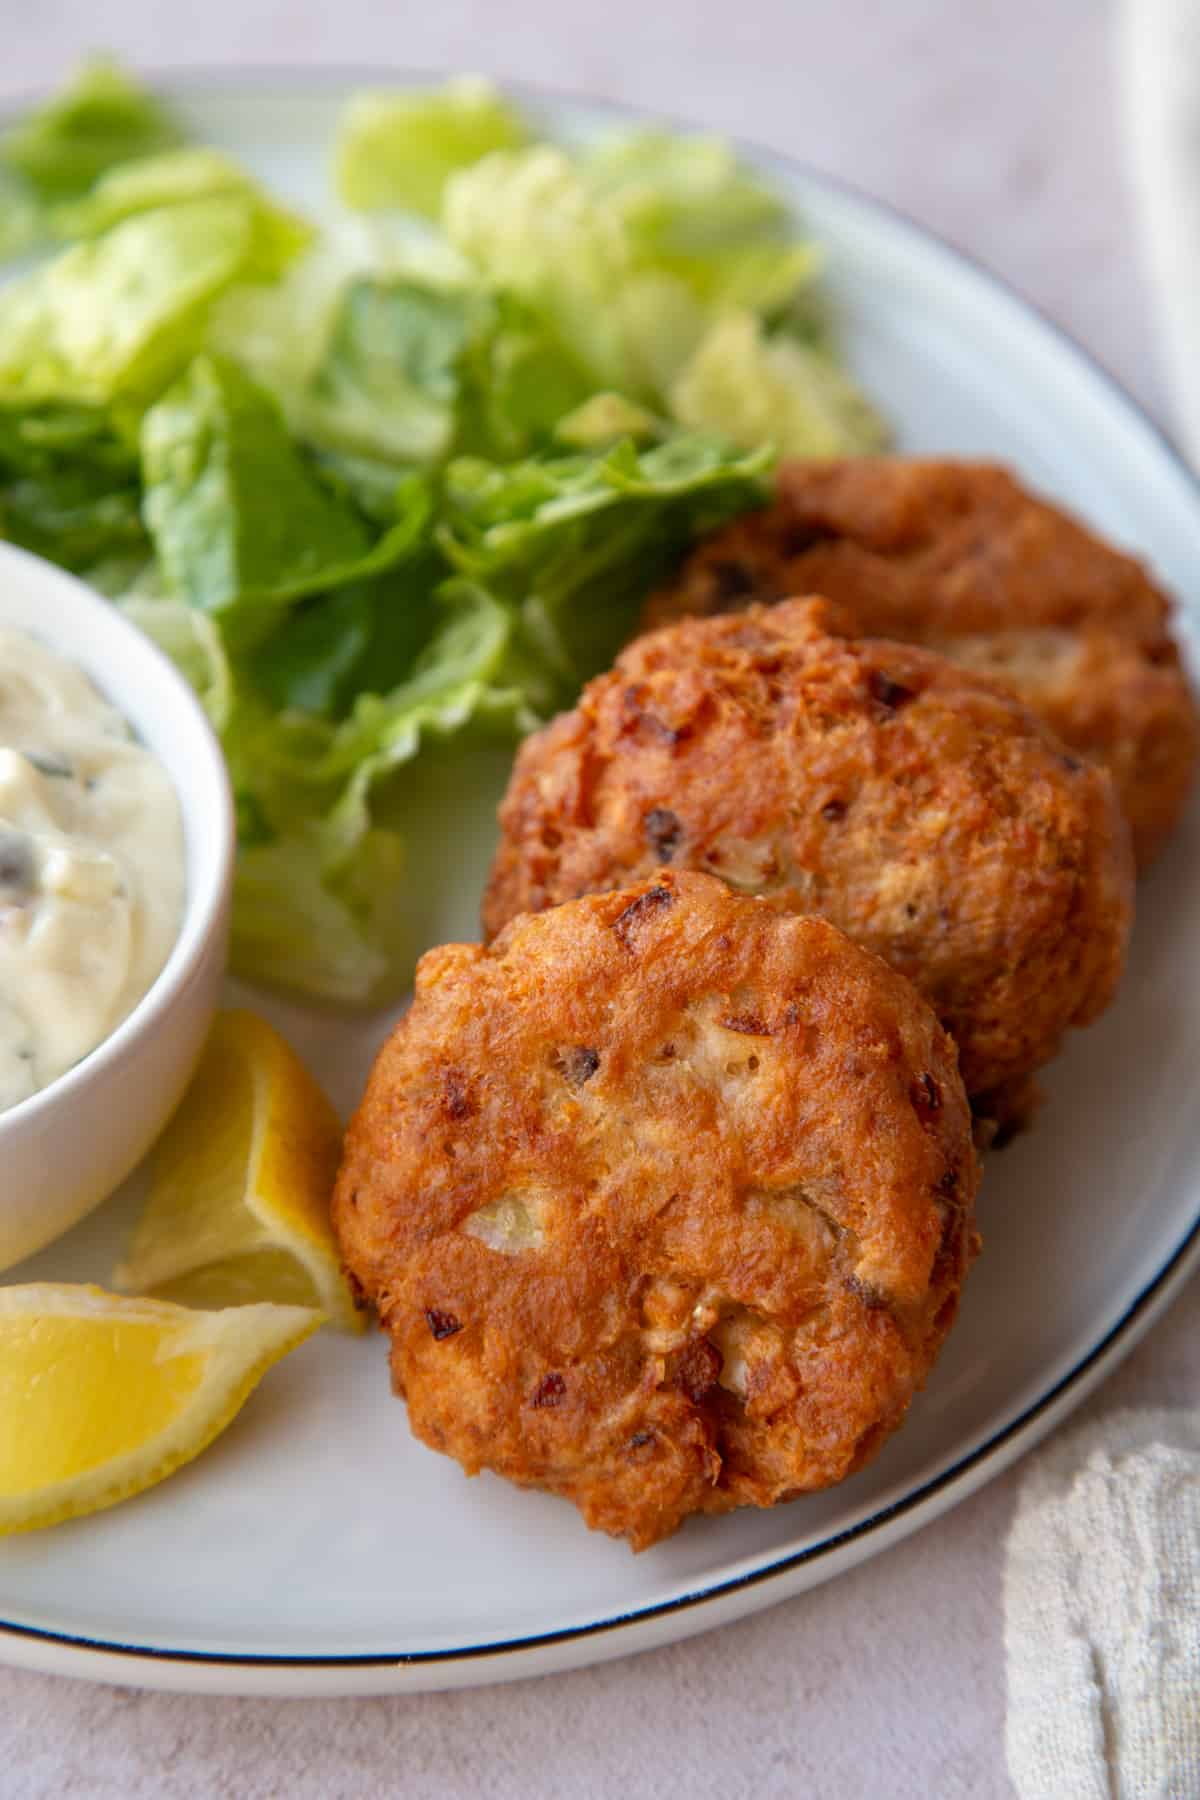 Top view of 2 fried Salmon Patties on a dinner plate next to Tartar Sauce and lemon wedges.